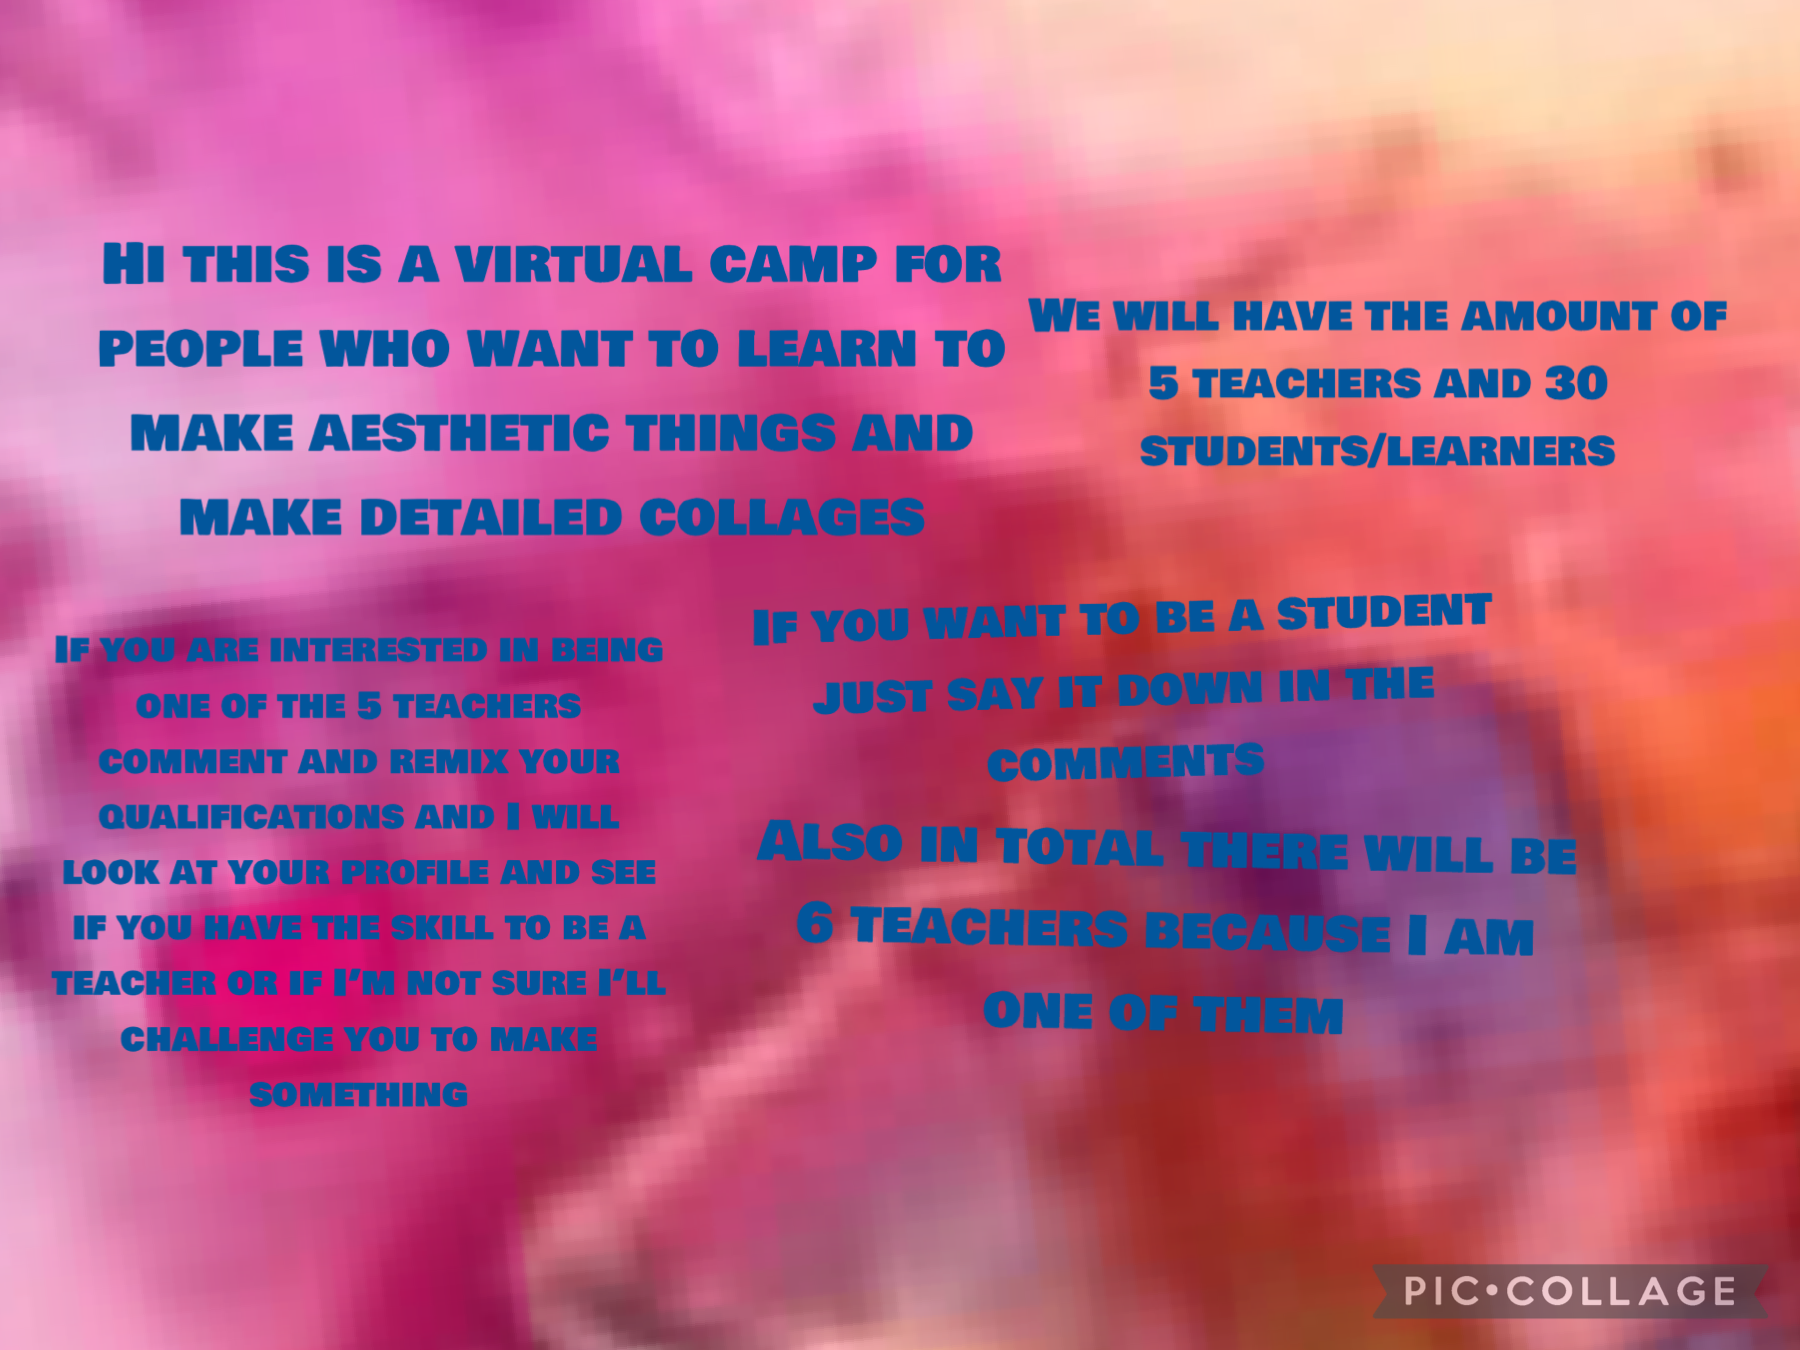 Please join! I would love to have you in my camp!